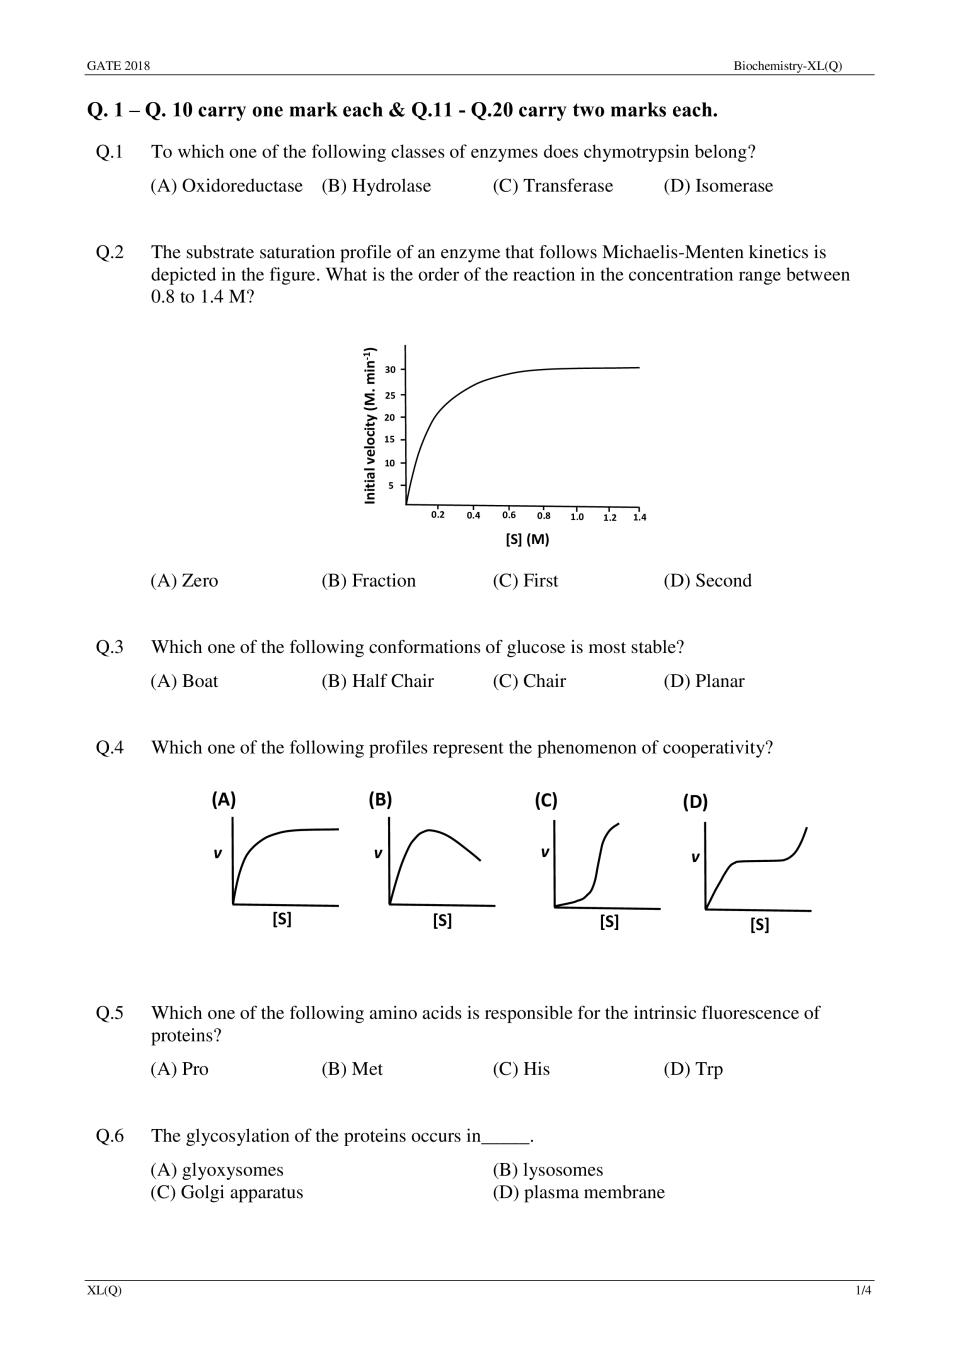 GATE 2018 Biochemistry(XL-Q) Question Paper with Answer - Page 1